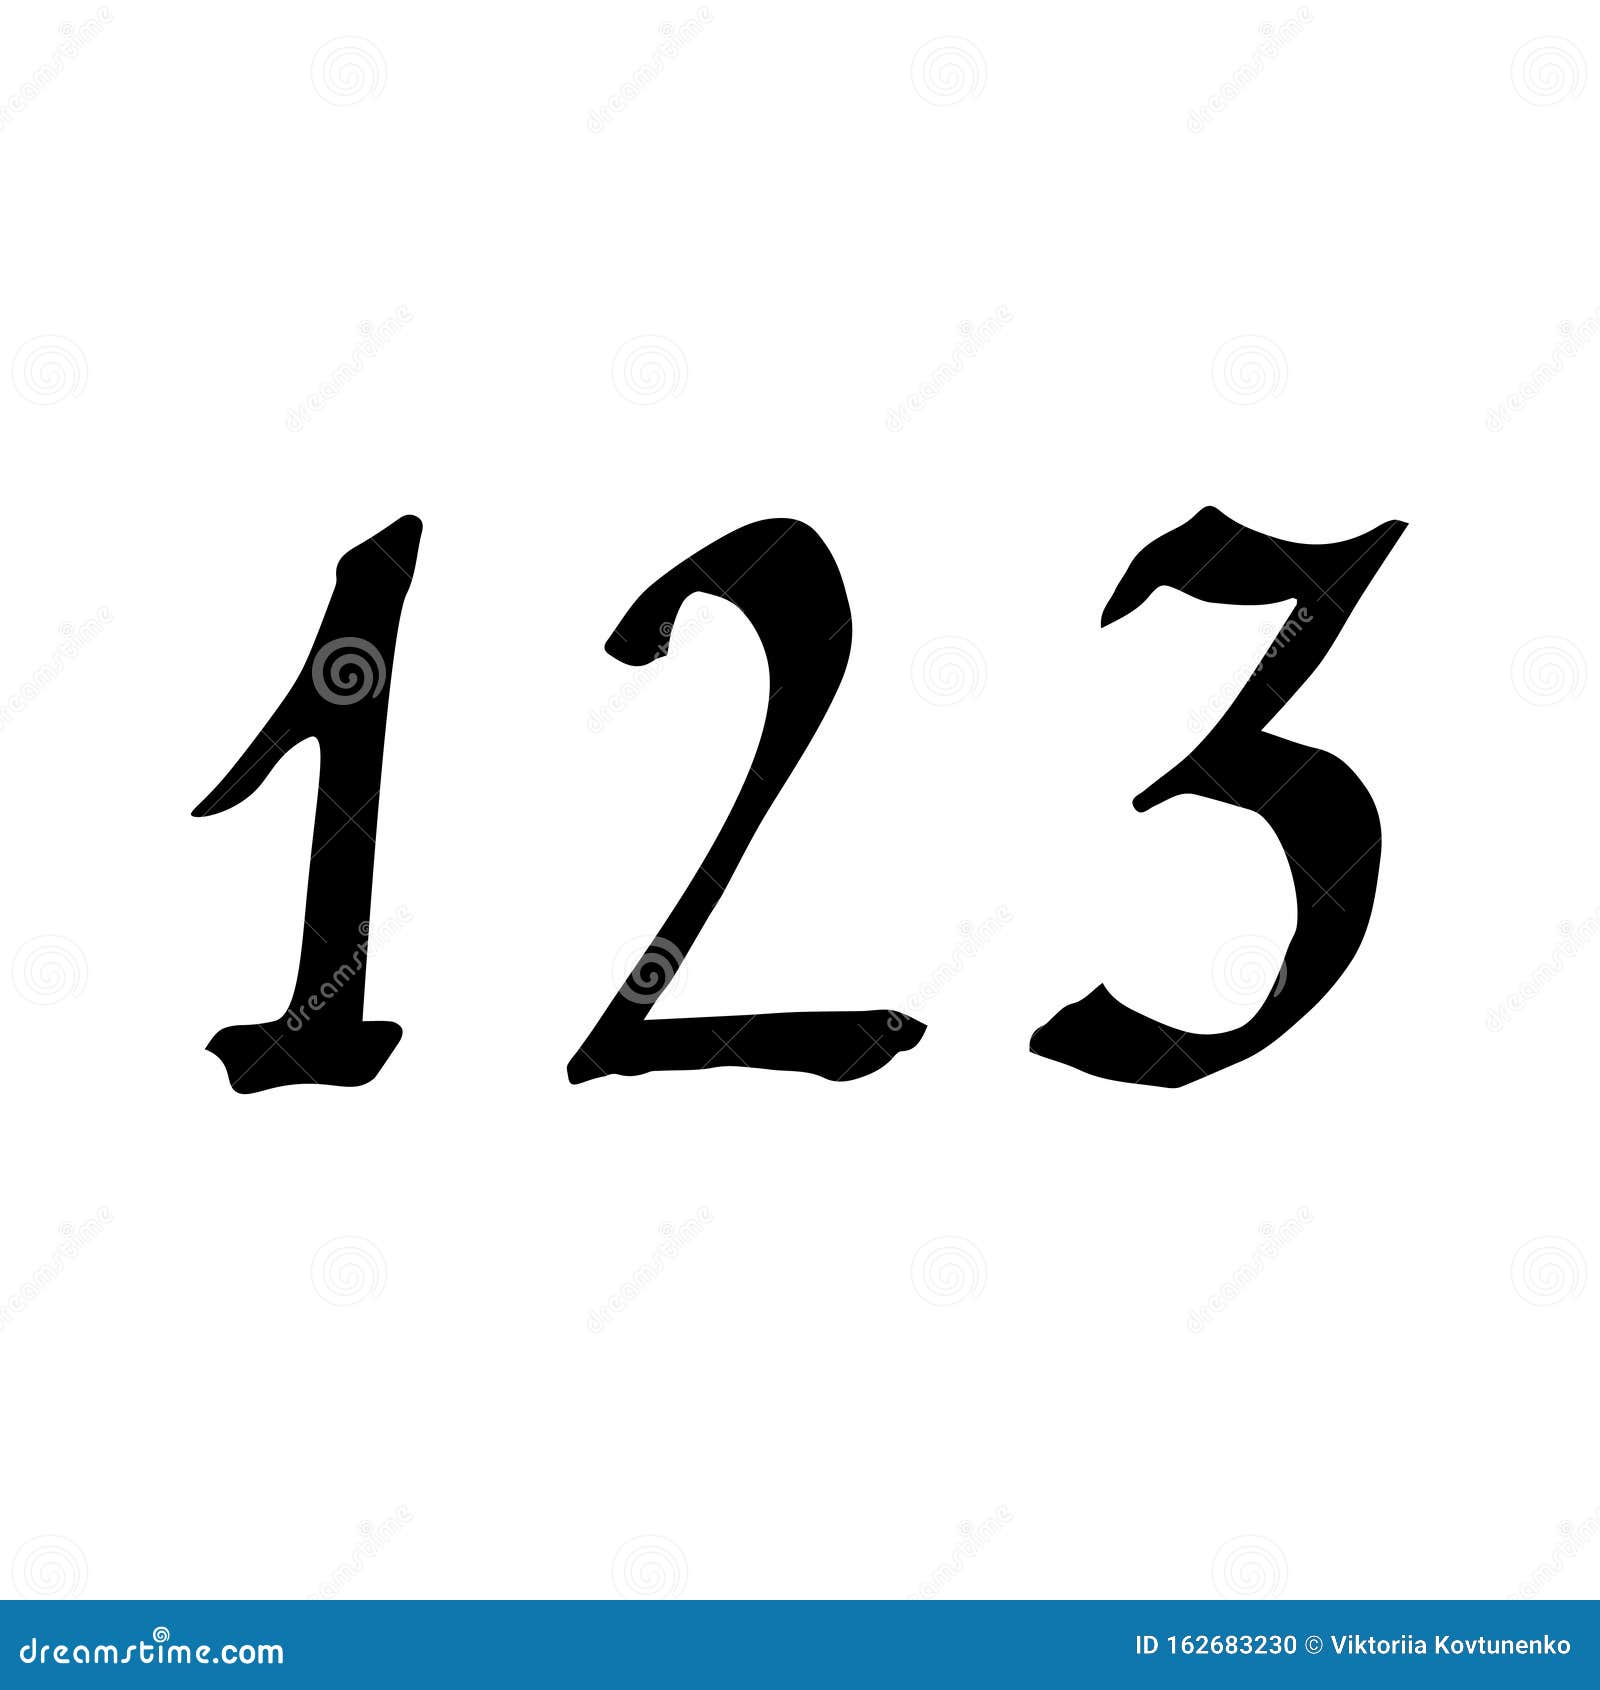 Ink Pen Numbers 123 Text Isolated On White Background Vector